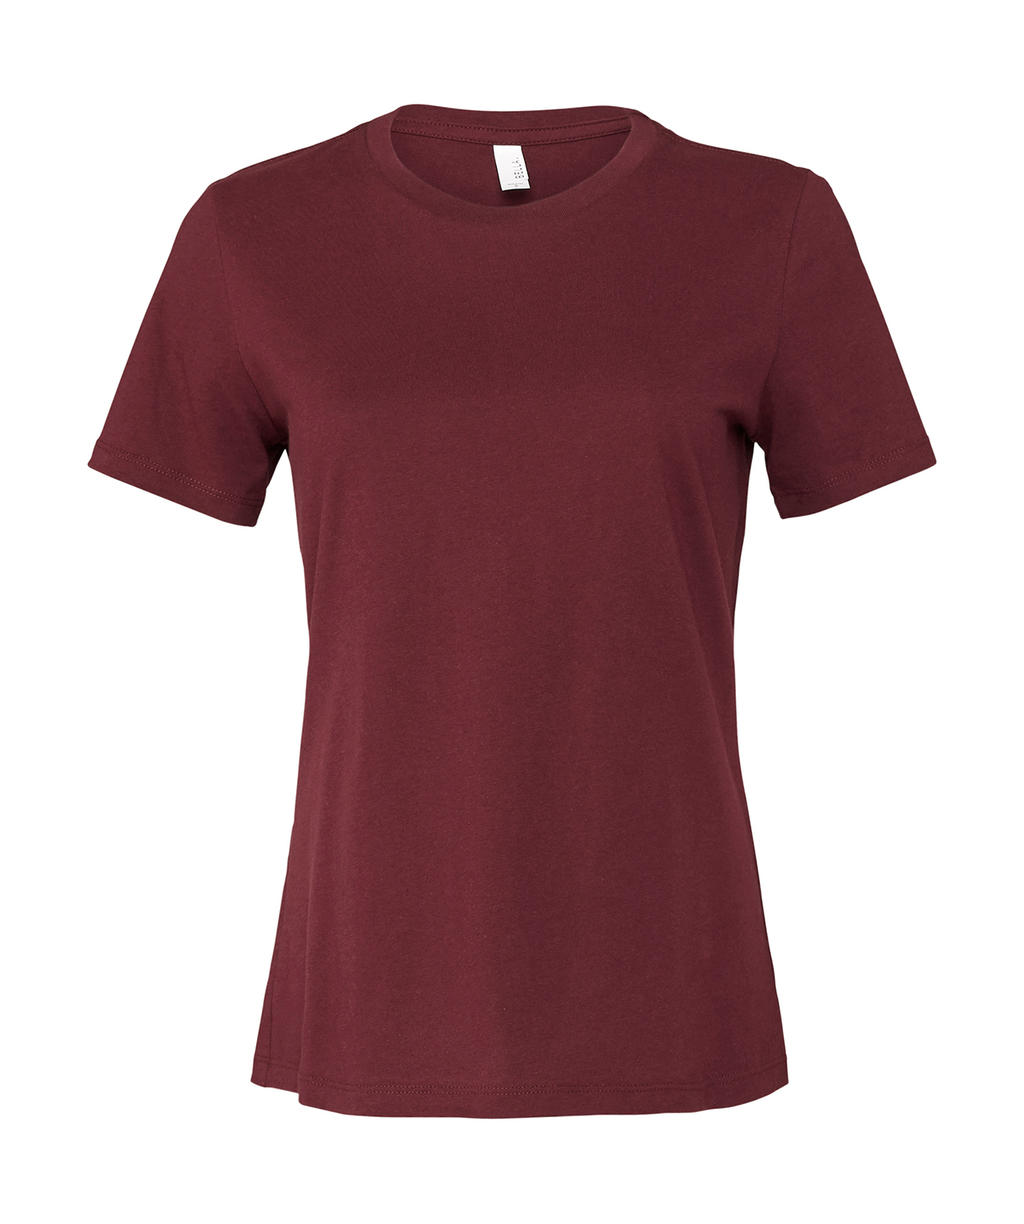  Womens Relaxed Jersey Short Sleeve Tee in Farbe Maroon